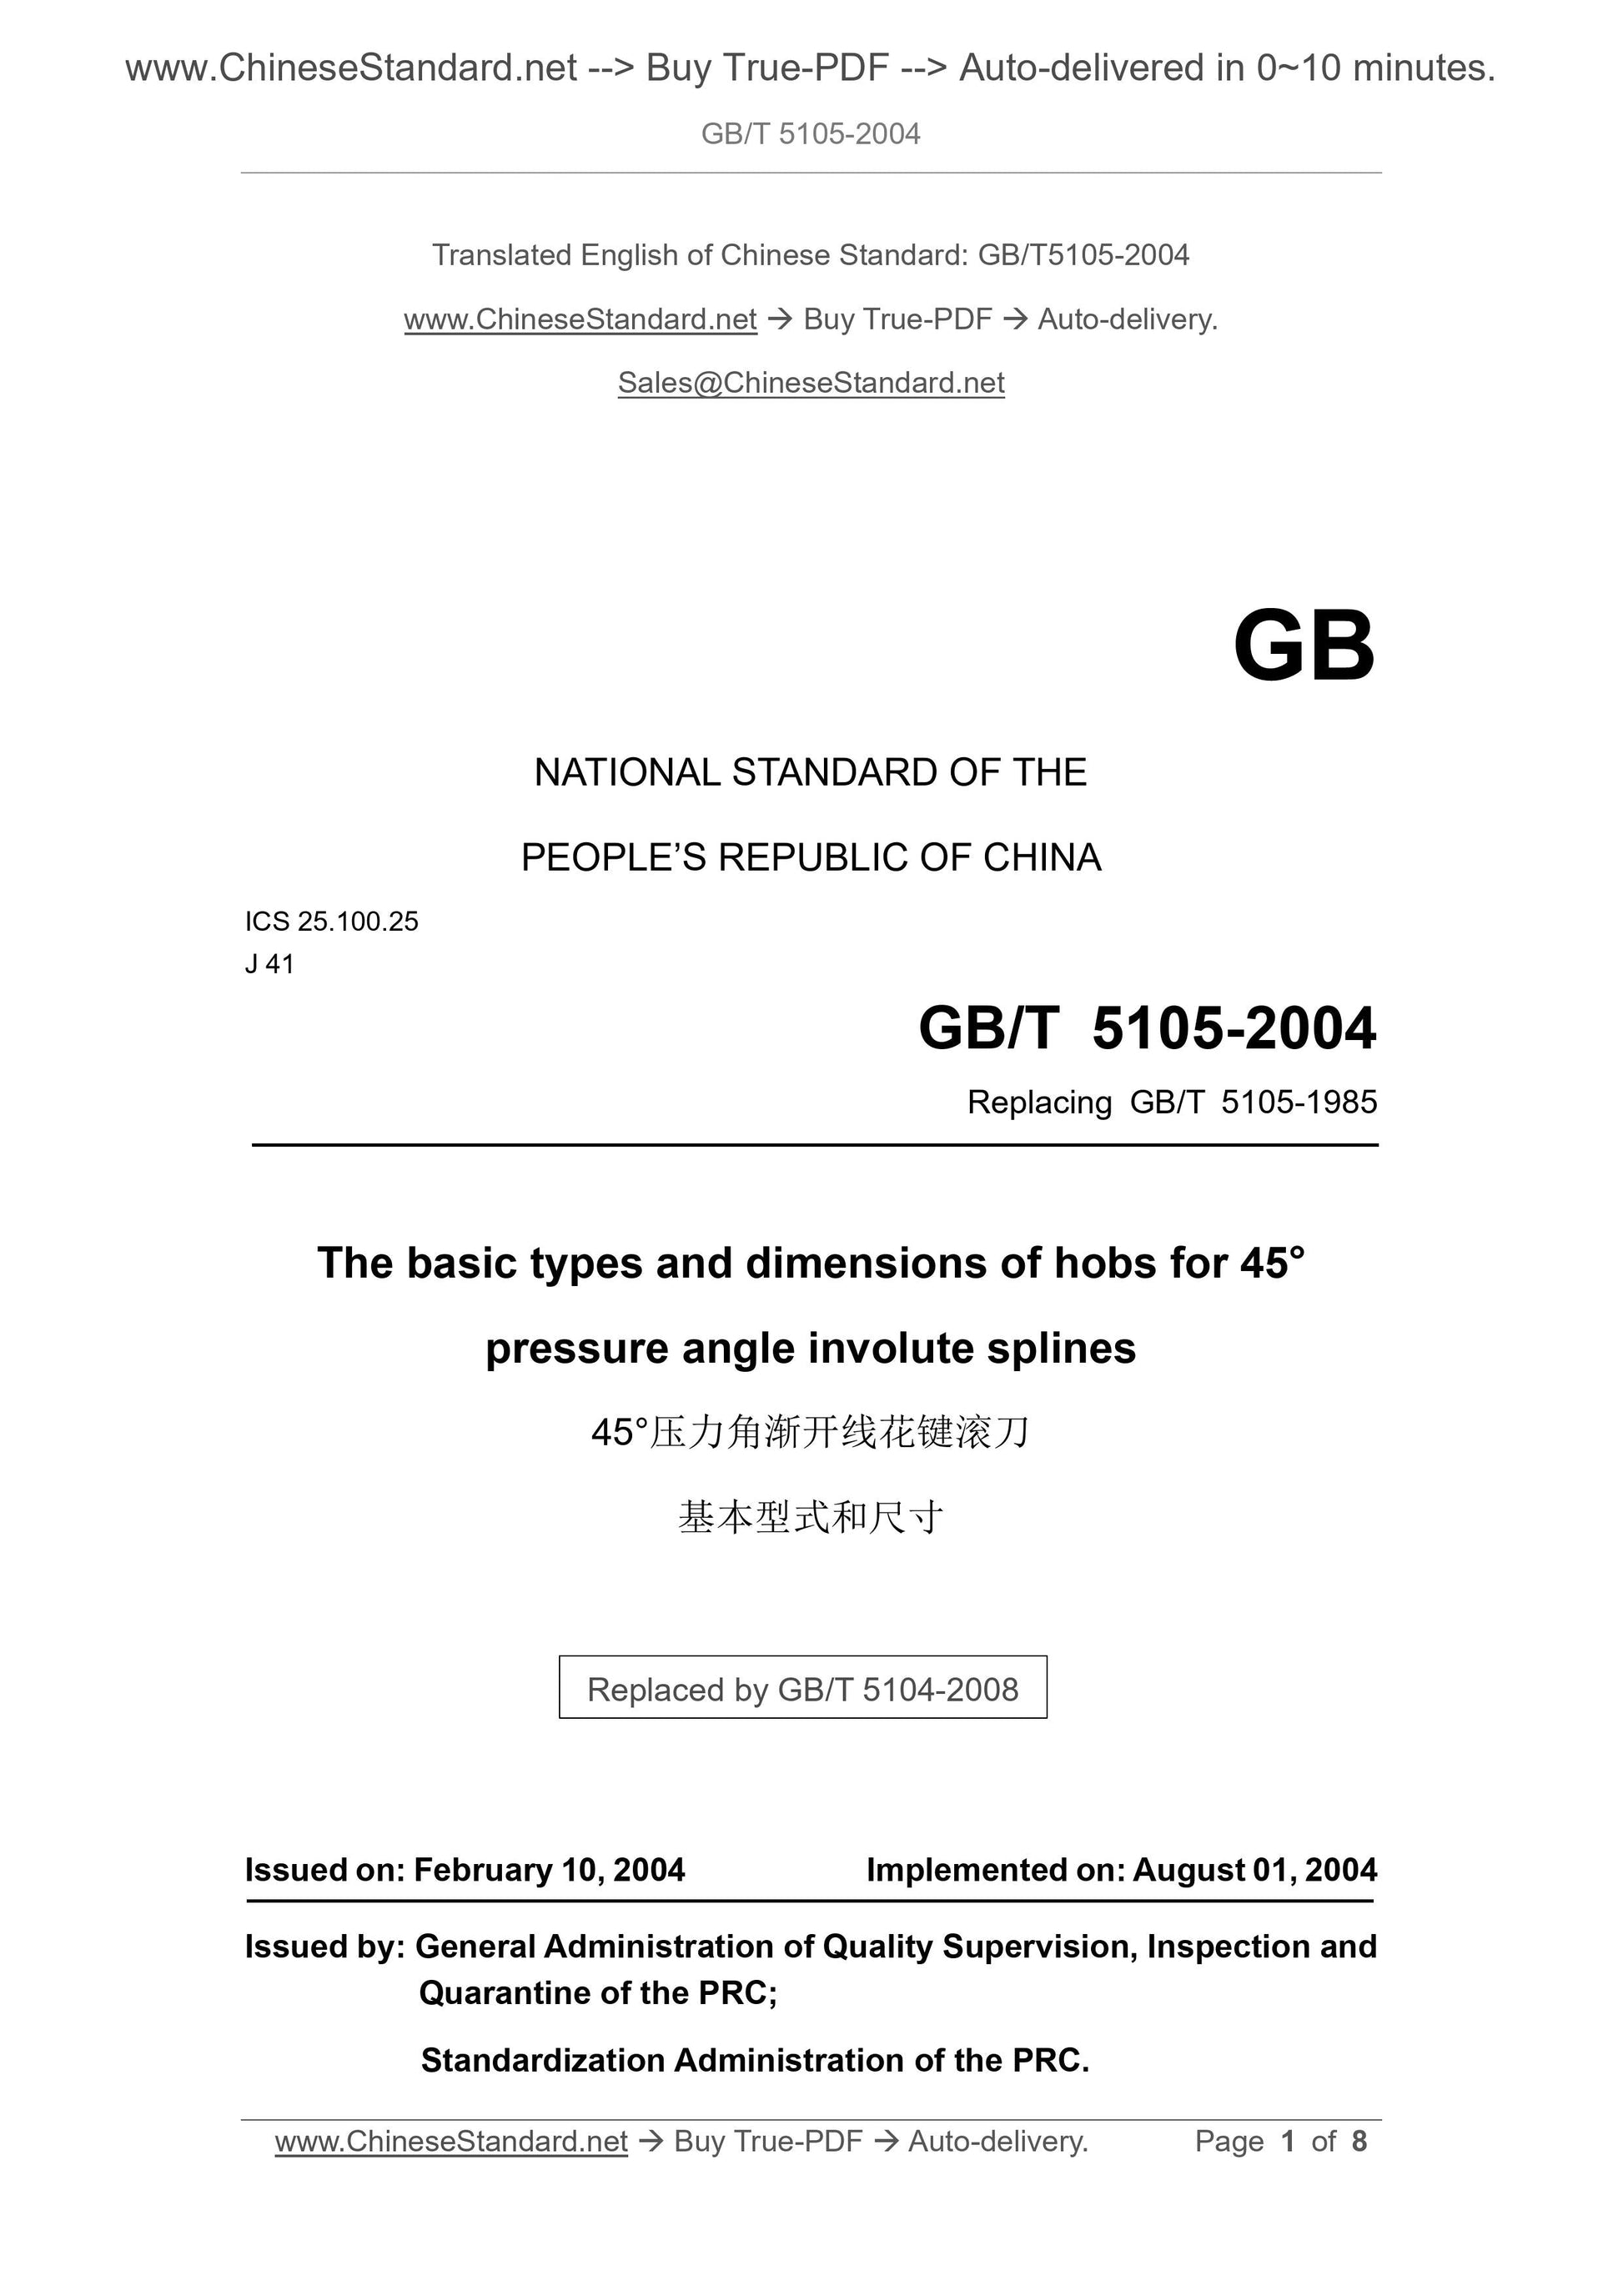 GB/T 5105-2004 Page 1